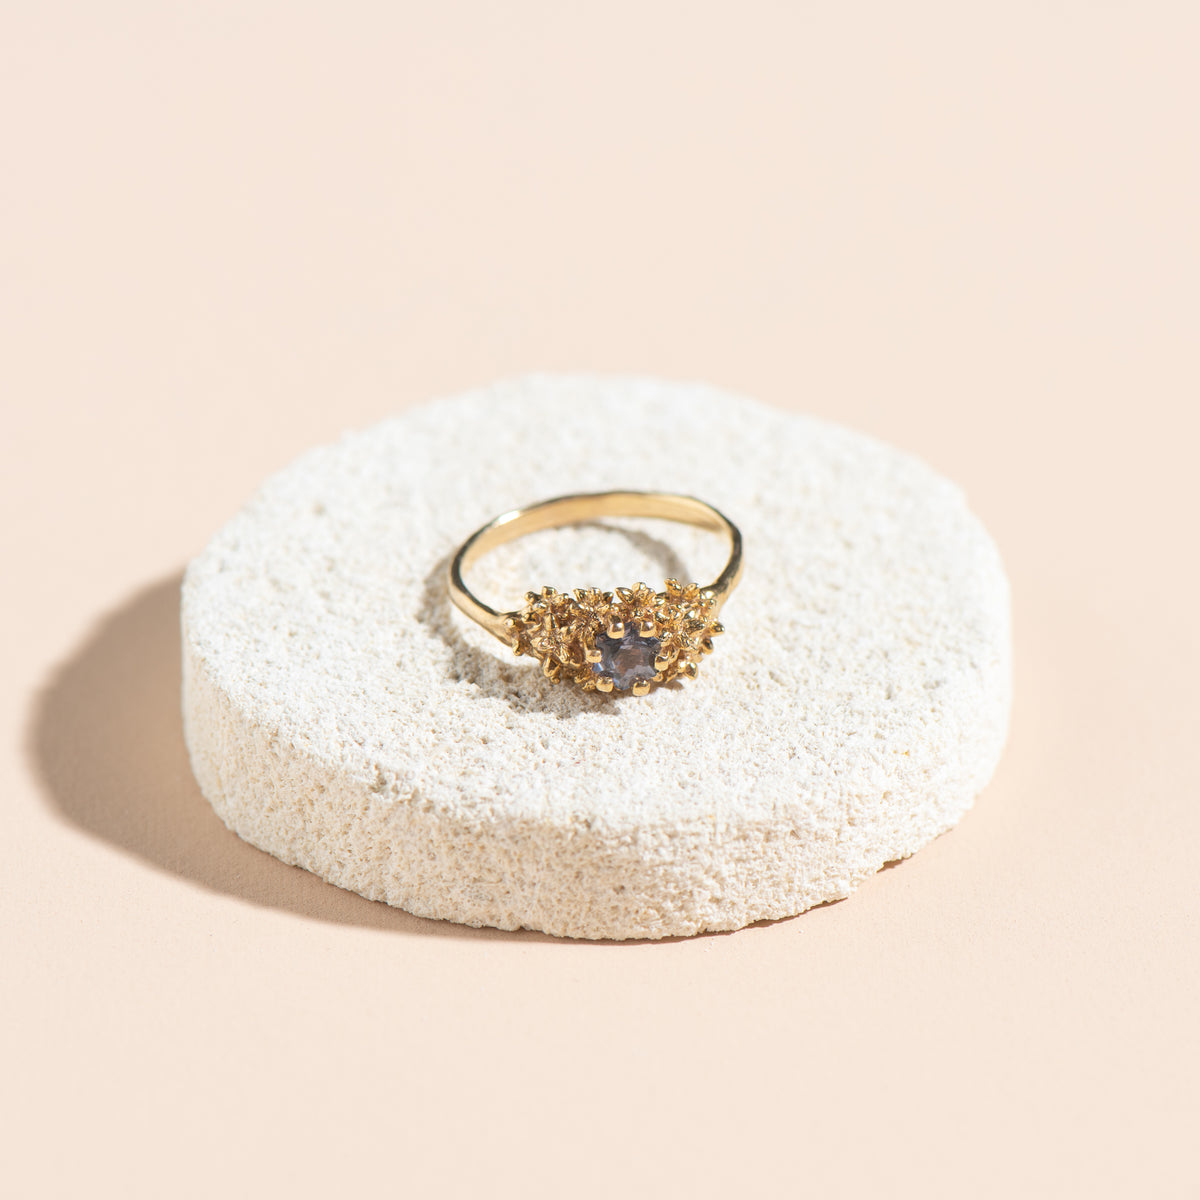 Spur Ring (gold with spinel)